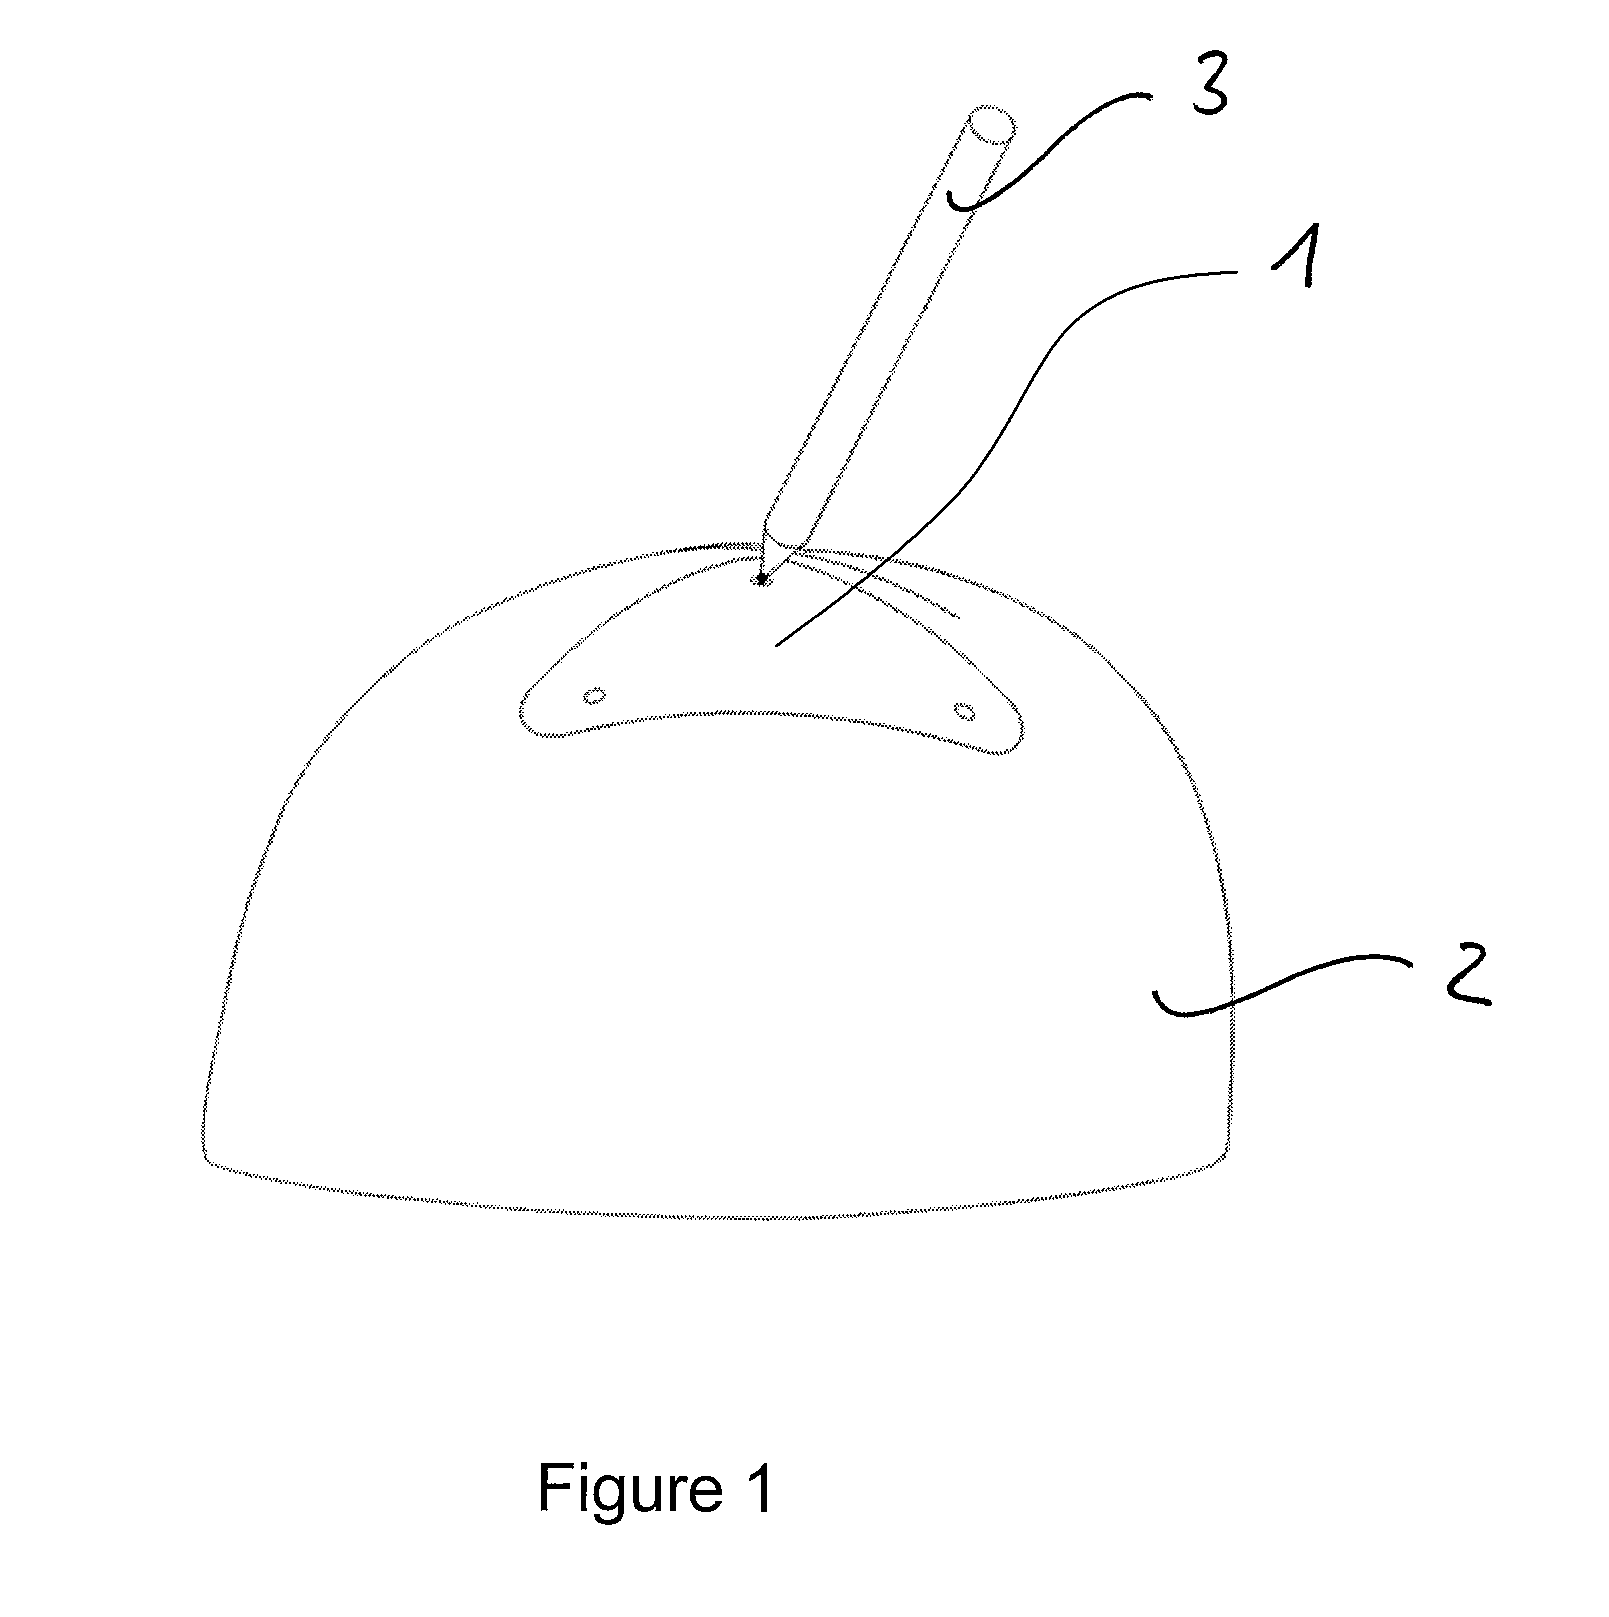 Adjustable fixation system for neurosurgical devices